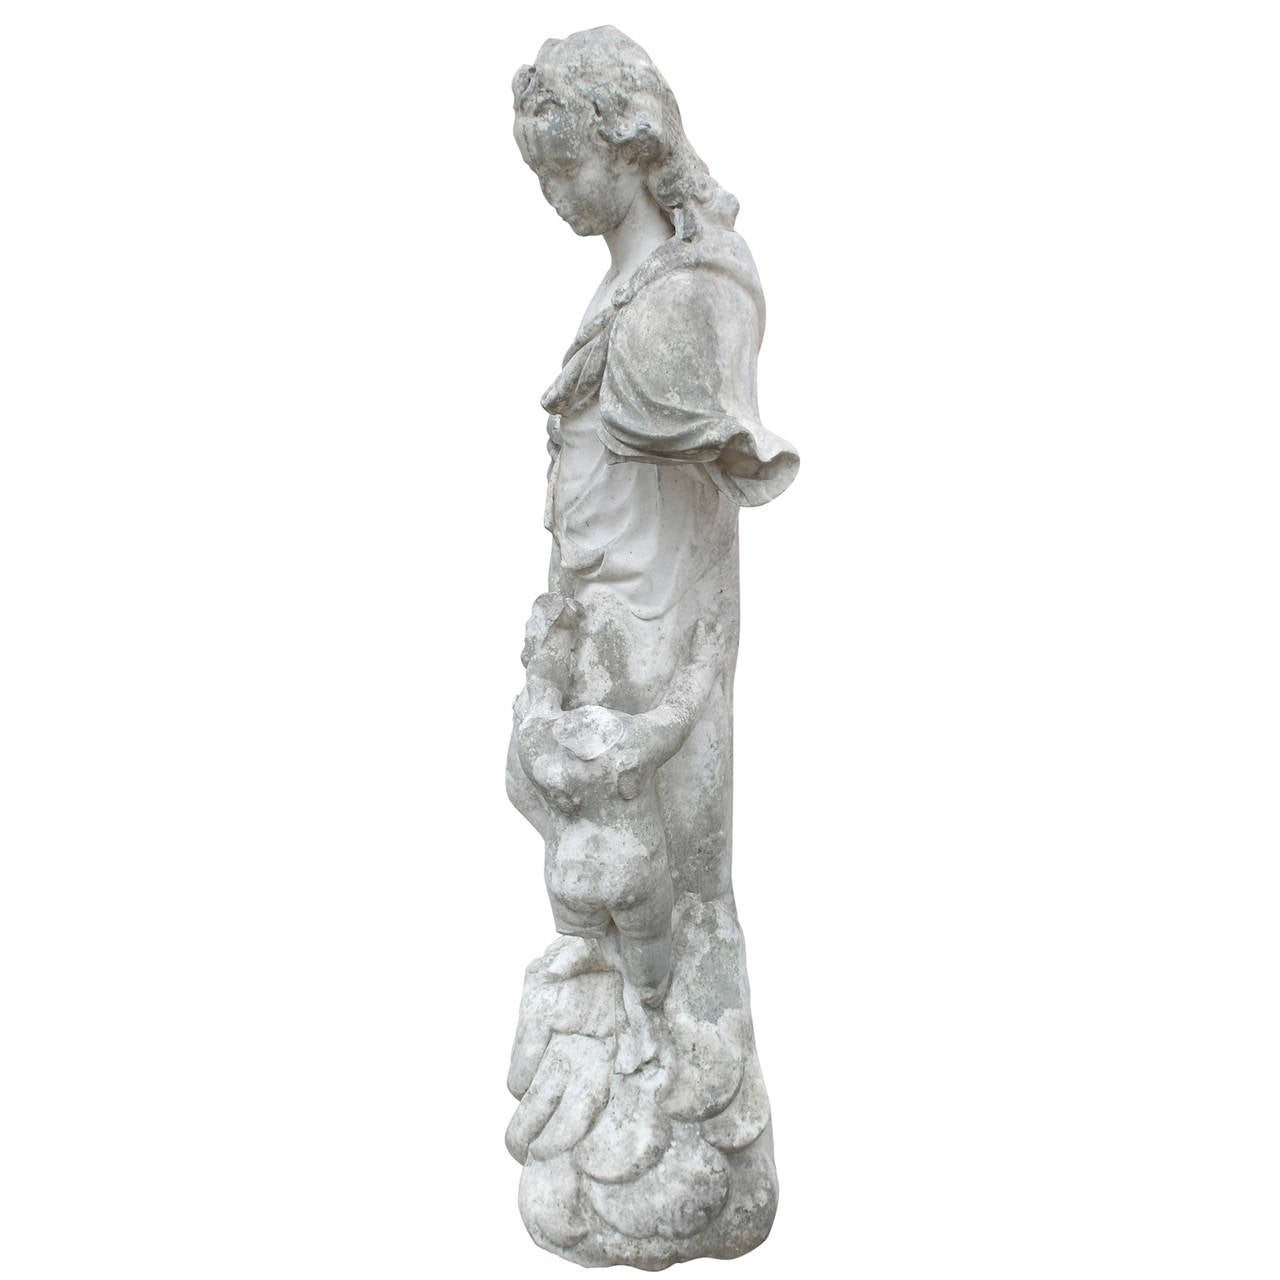 Baroque Female Marble Statue from 1750s.